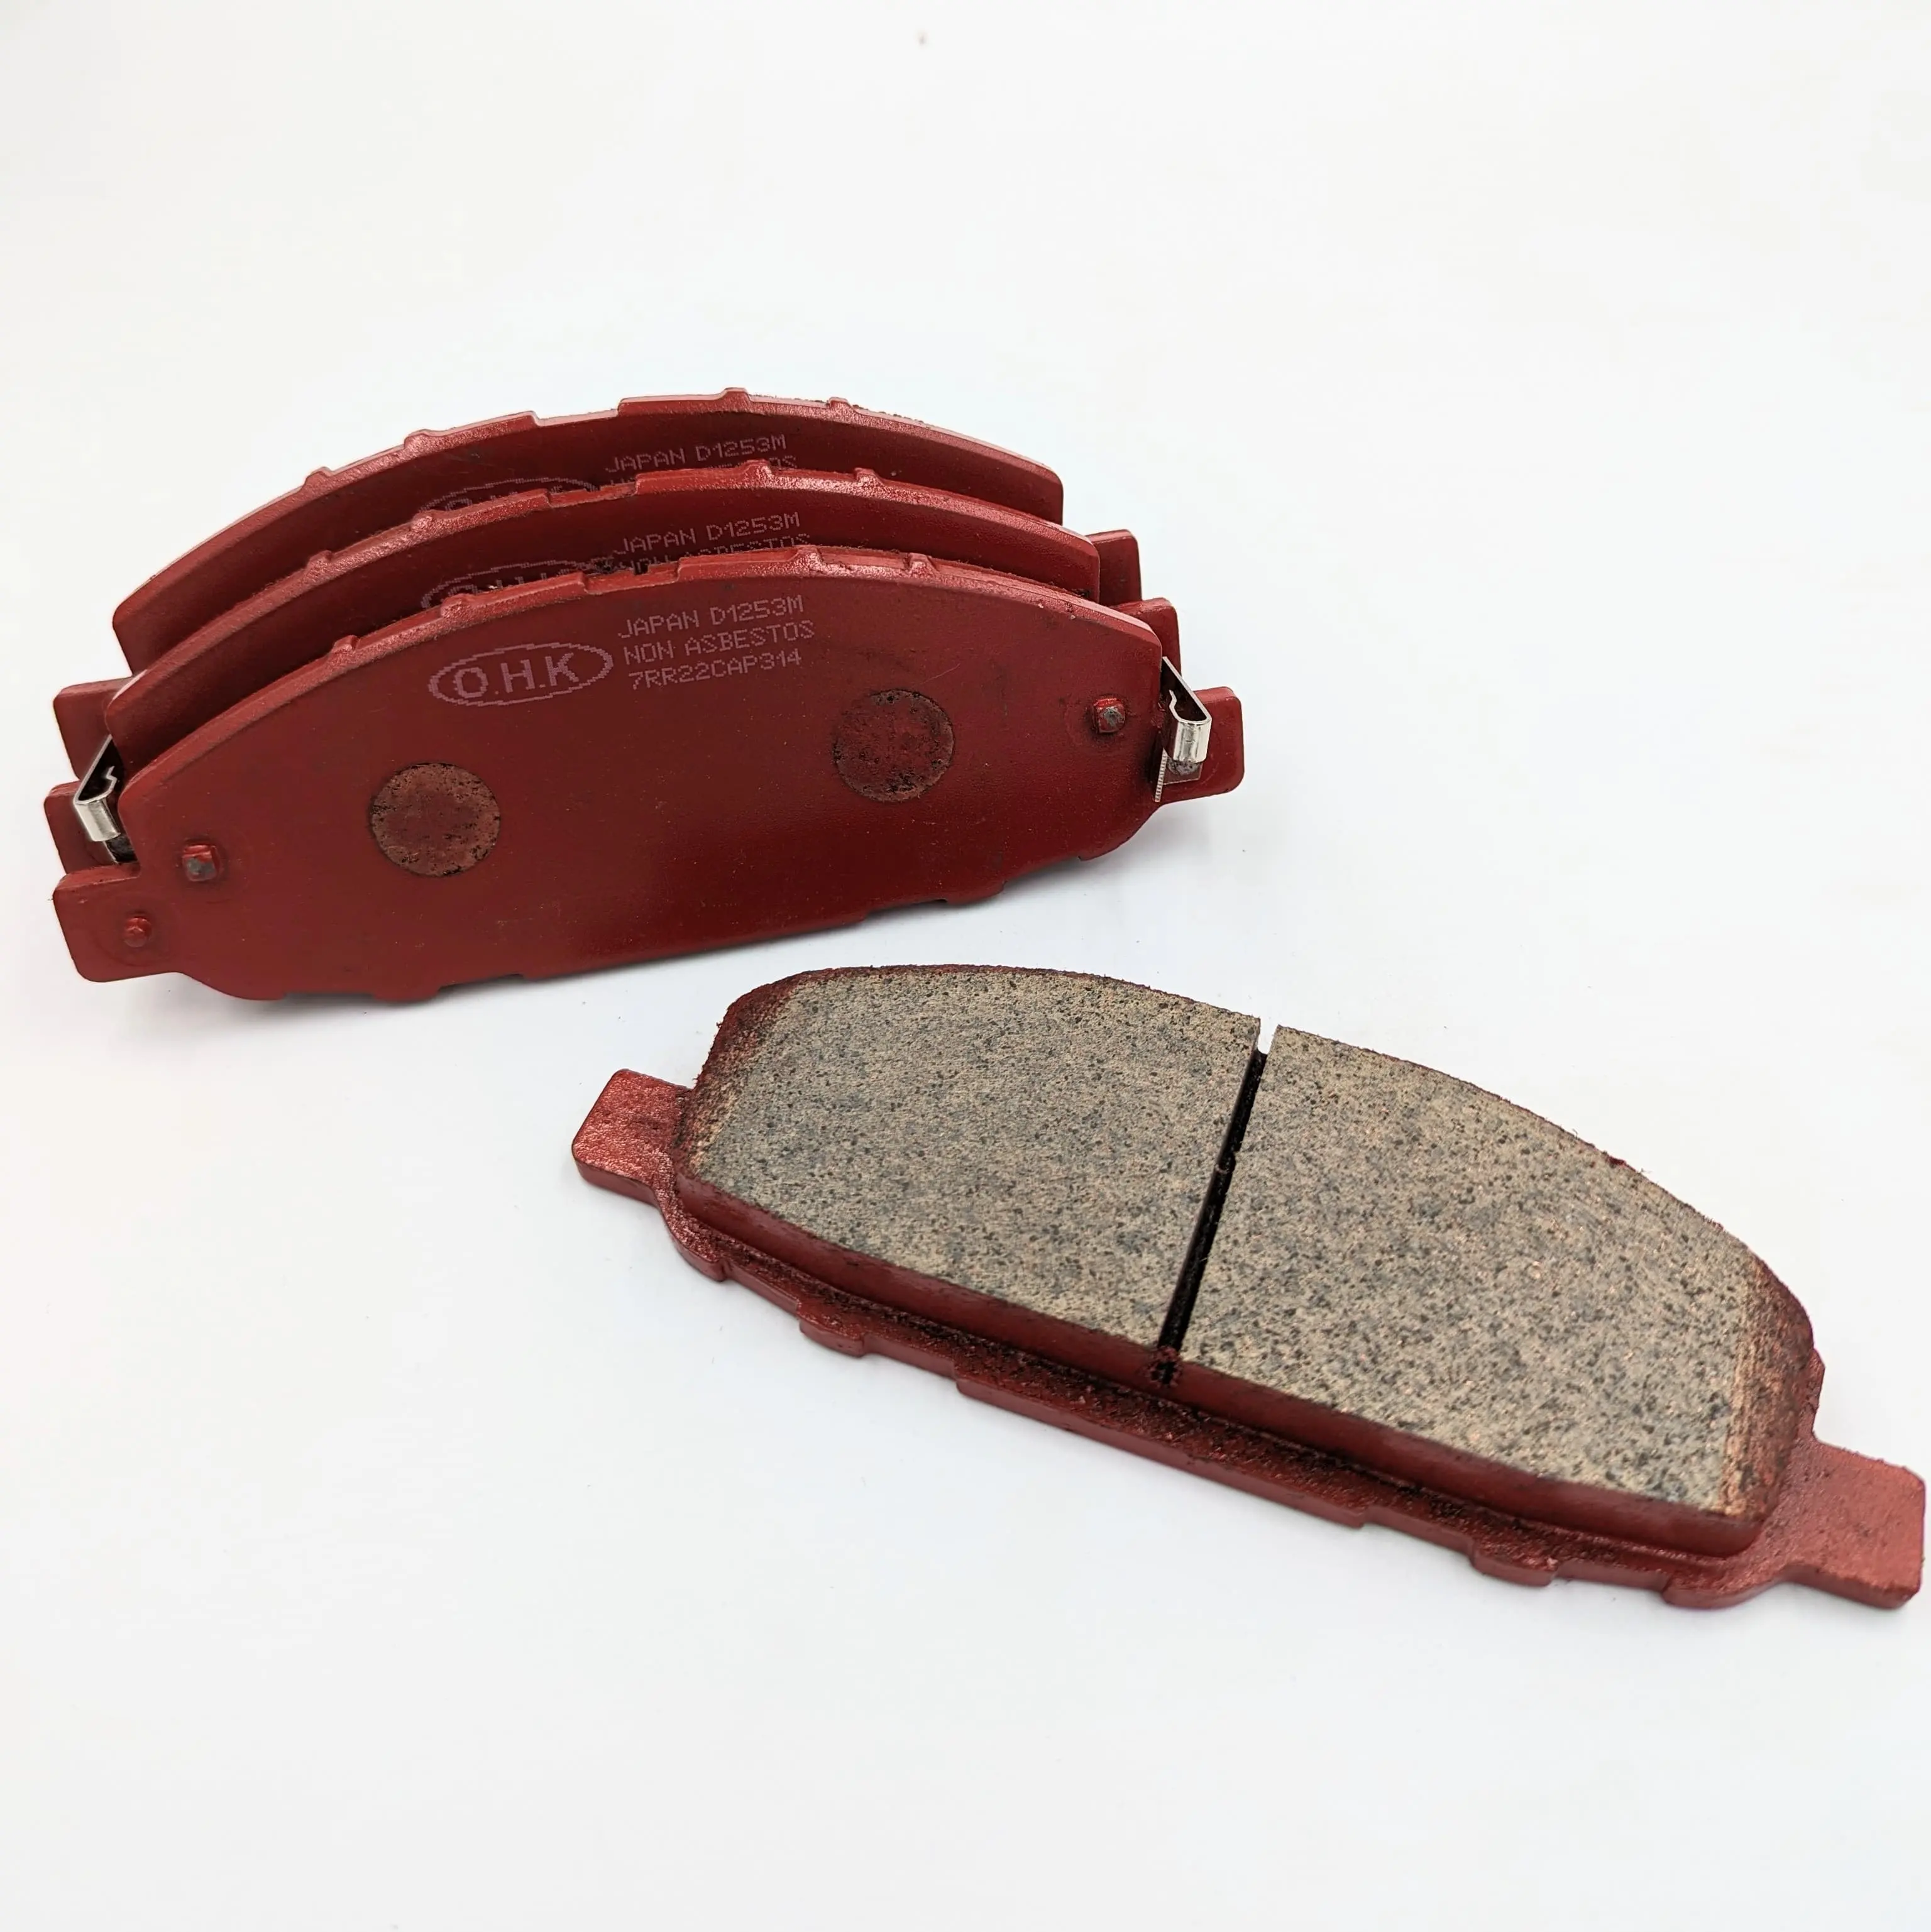 New Condition Japan Vehicle Parts Top Systems Wholesales Auto 12 Months Warranty Accessories Brake Pad for replace/repair